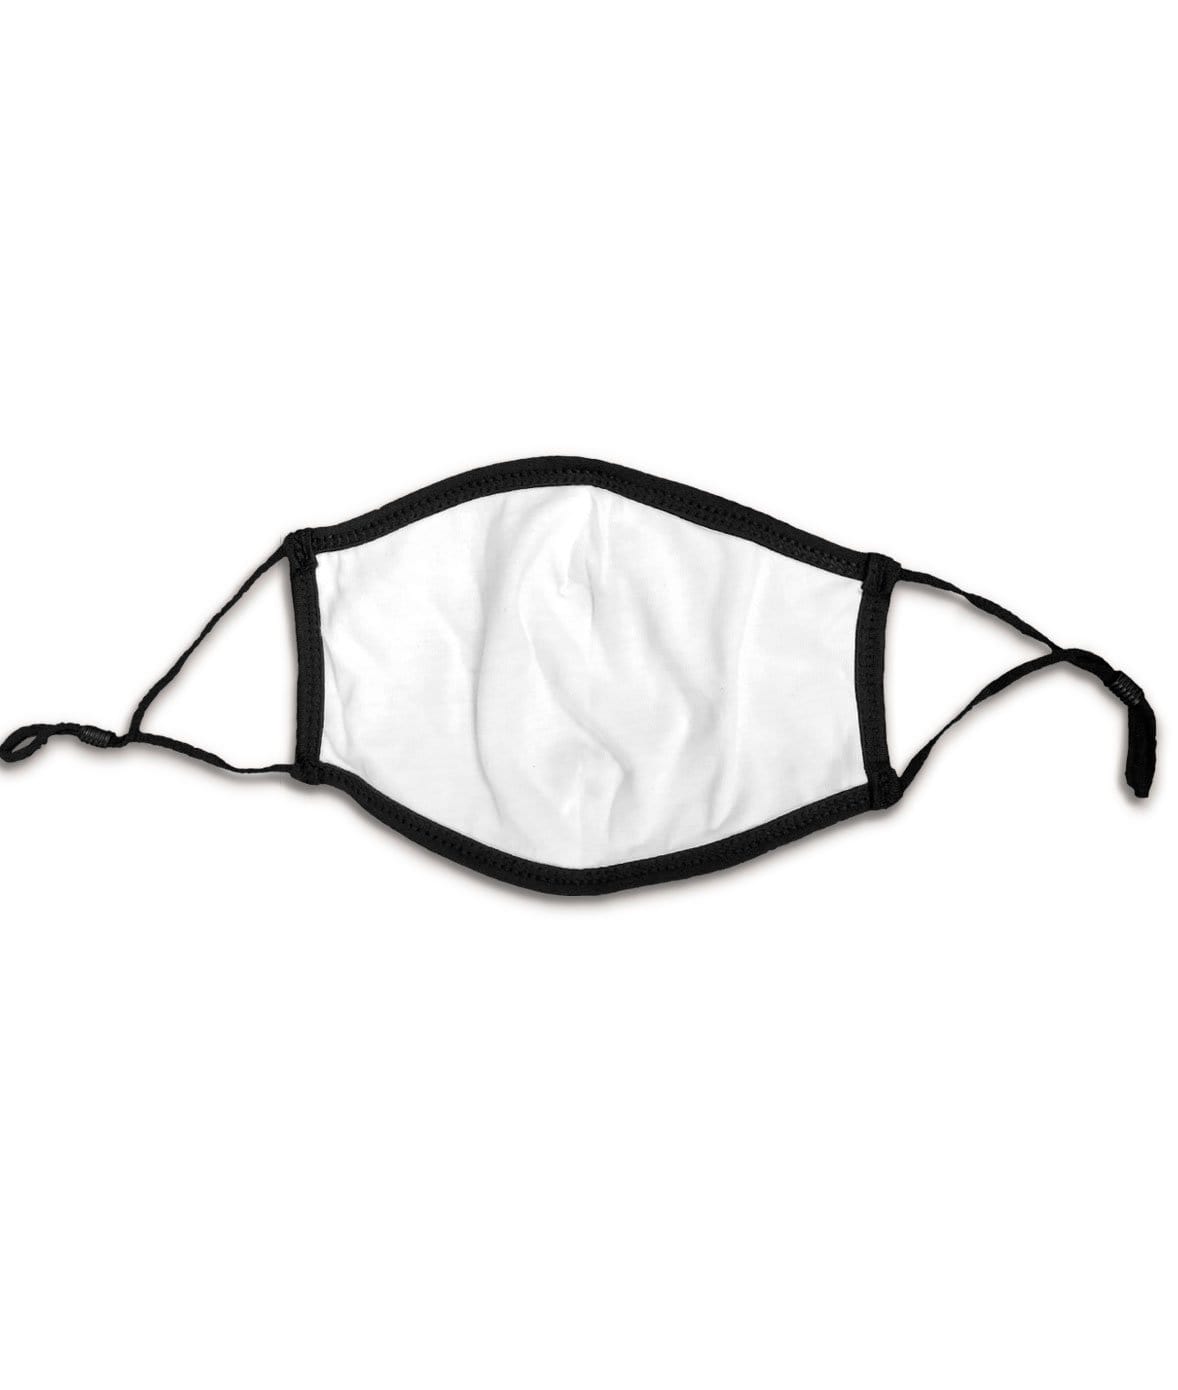 Nayked Apparel Women Women's Ridiculously Soft White Bandana Print 2-Layer Face Mask with Adjustable Ear Loops White / NAY-MSK-SUB1